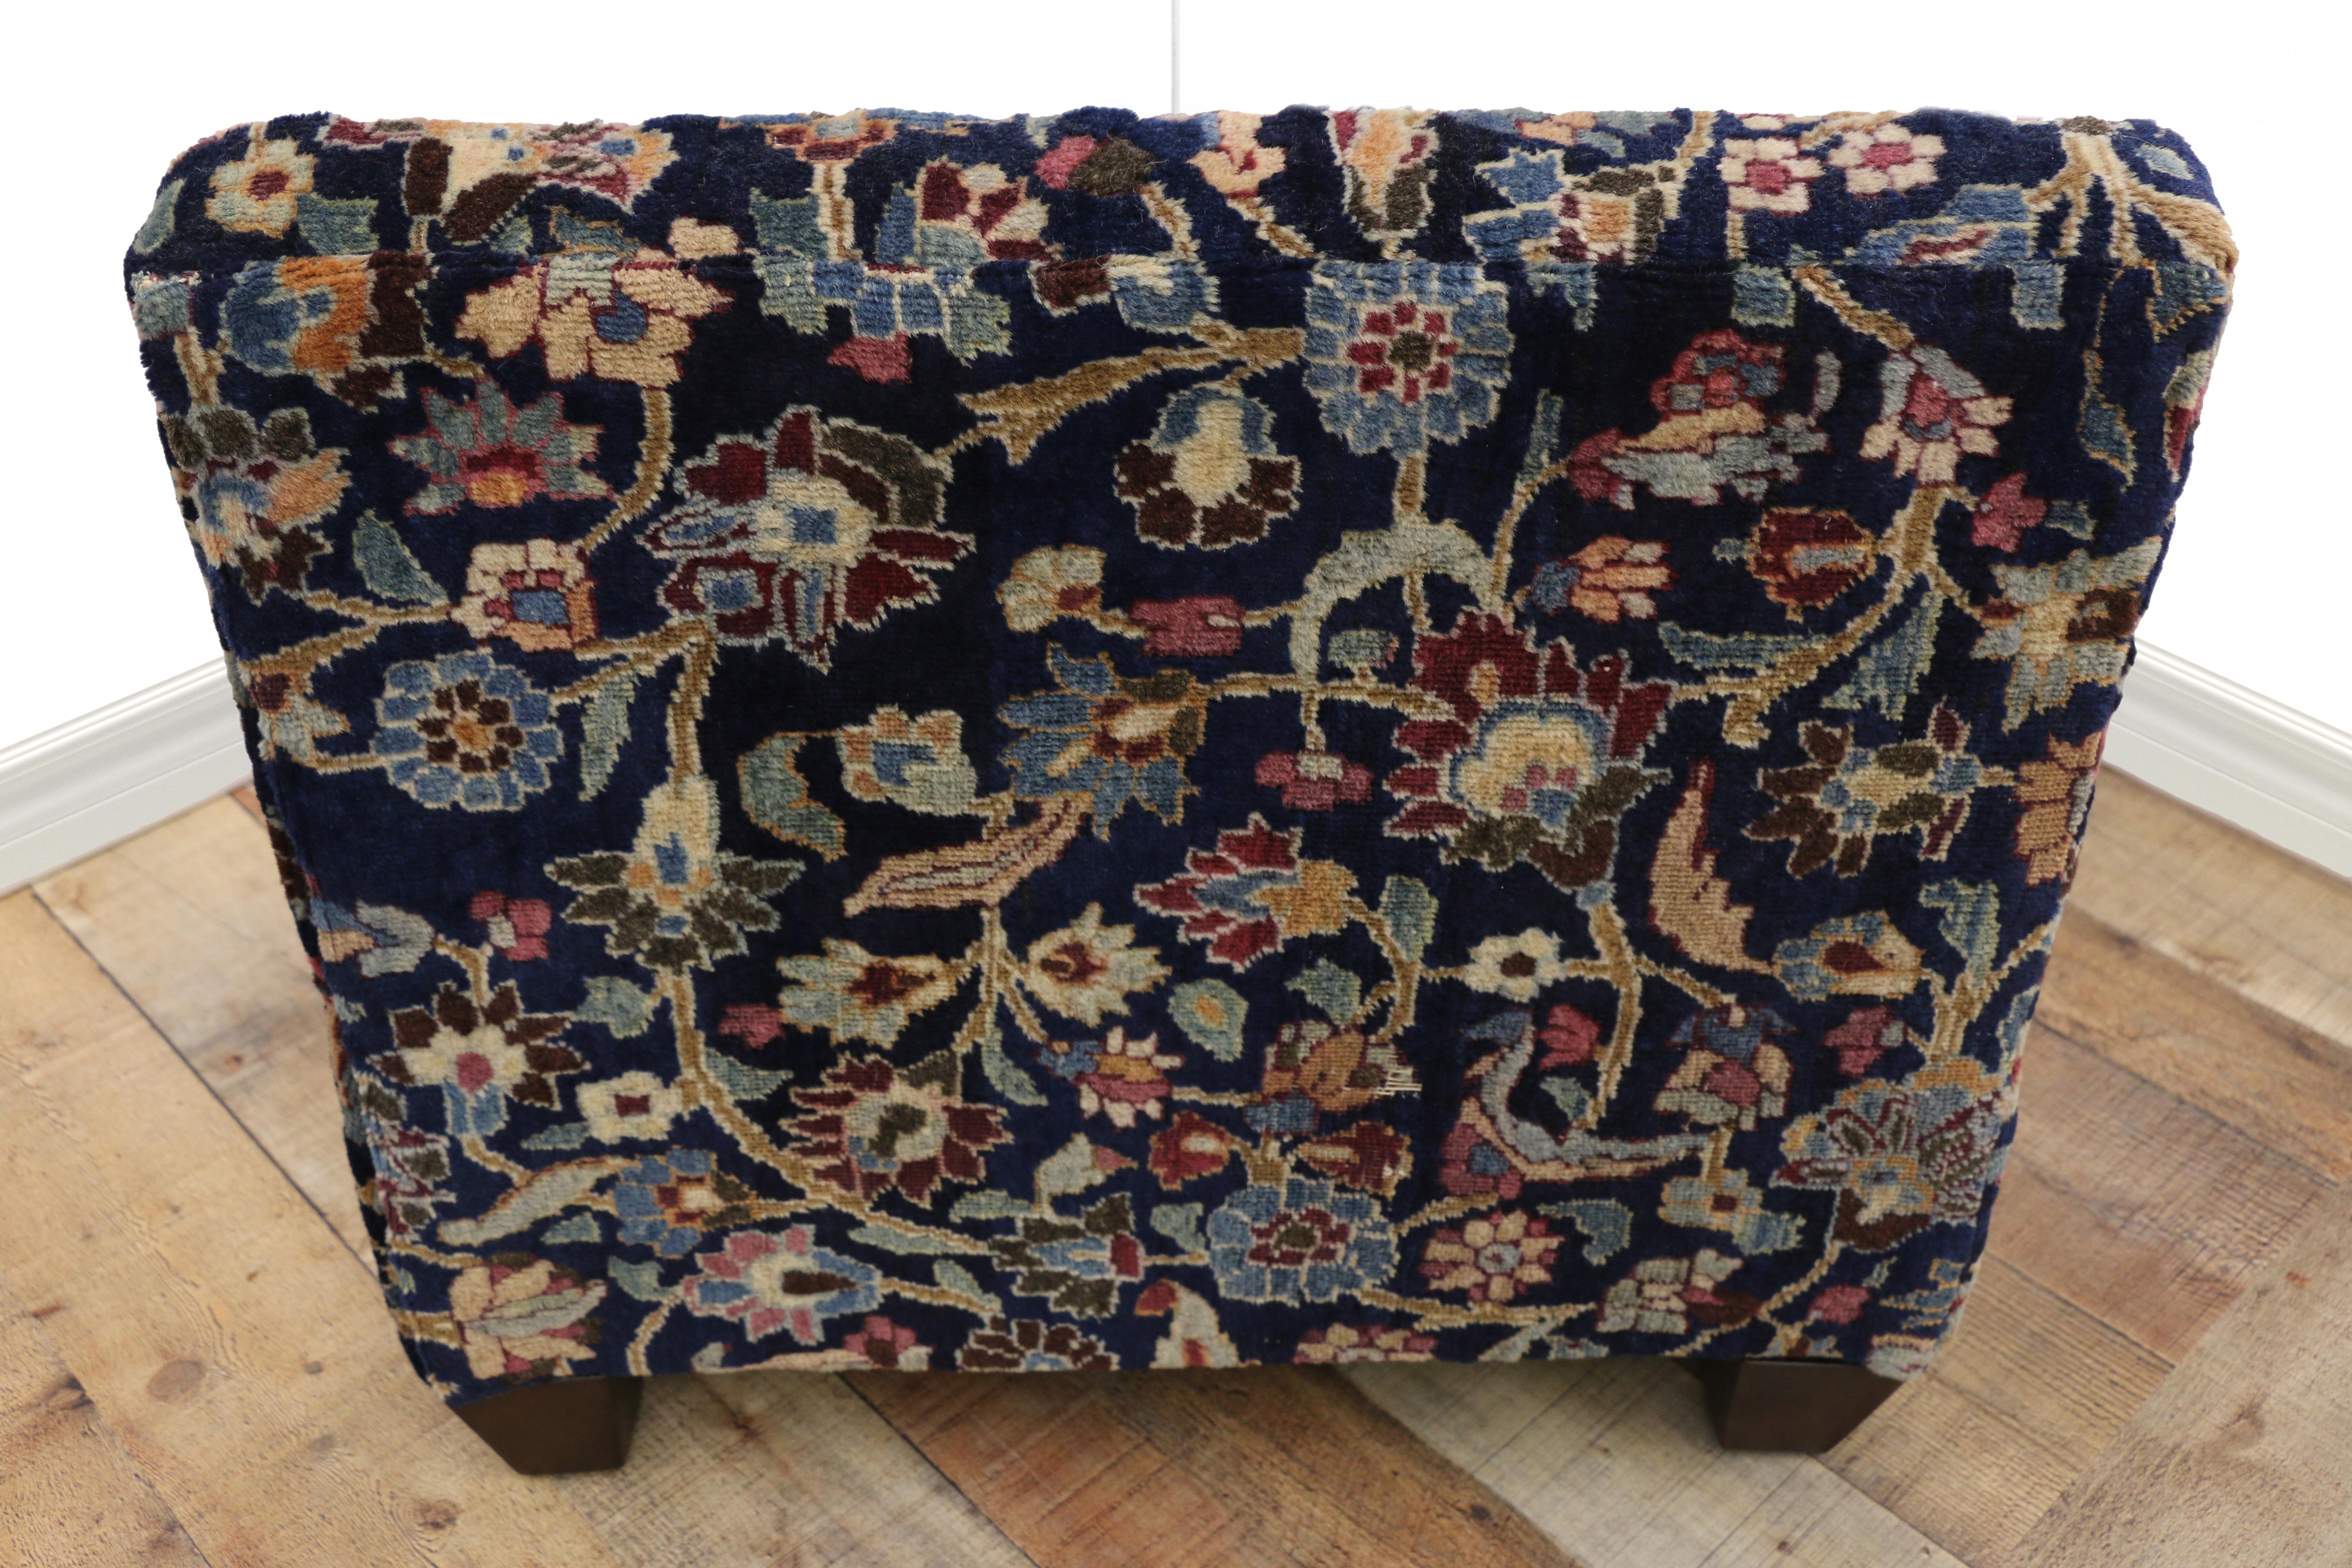 19th Century Low Profile Slipper Chair or Persian Petbed from Antique Persian Khorassan Rug